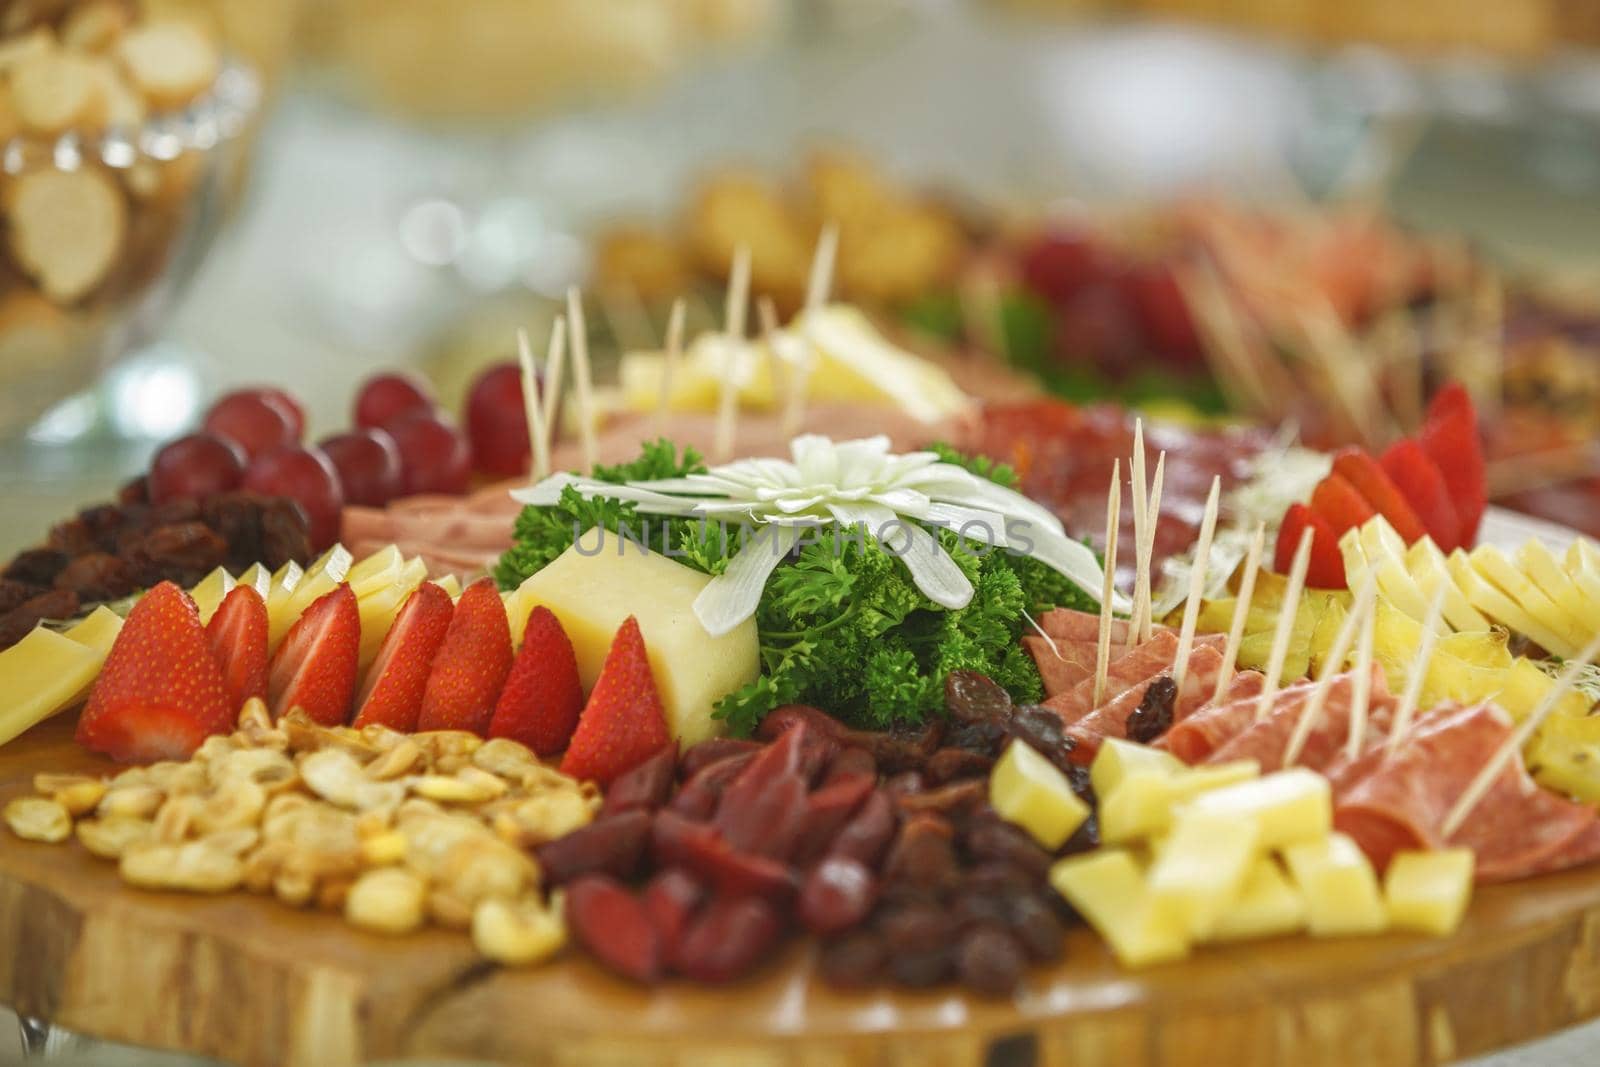 Catering service with various fruits and vegetables on wooden plate